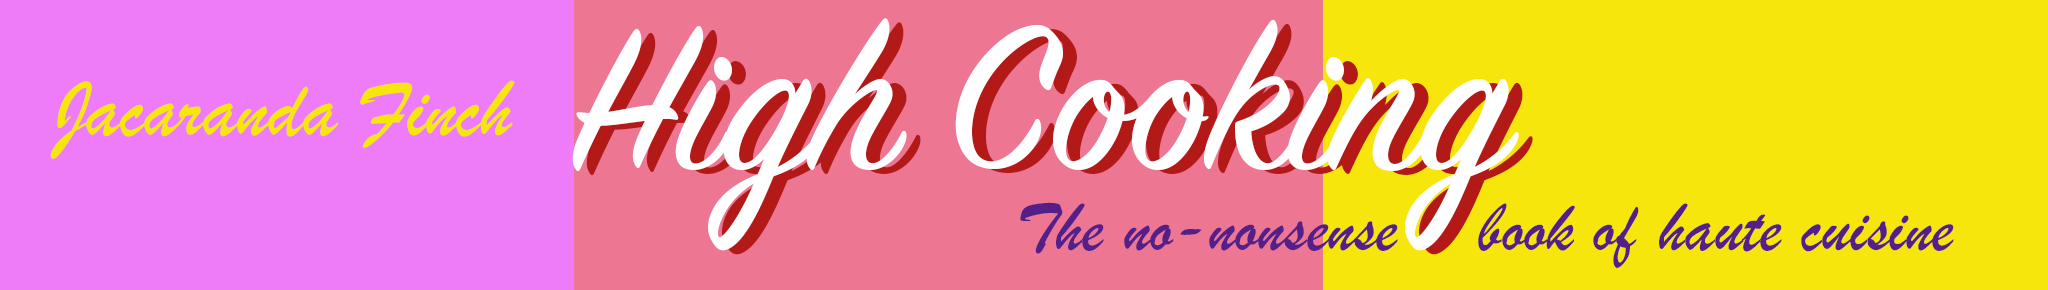 Satirical cooking feature banner for High Cooking